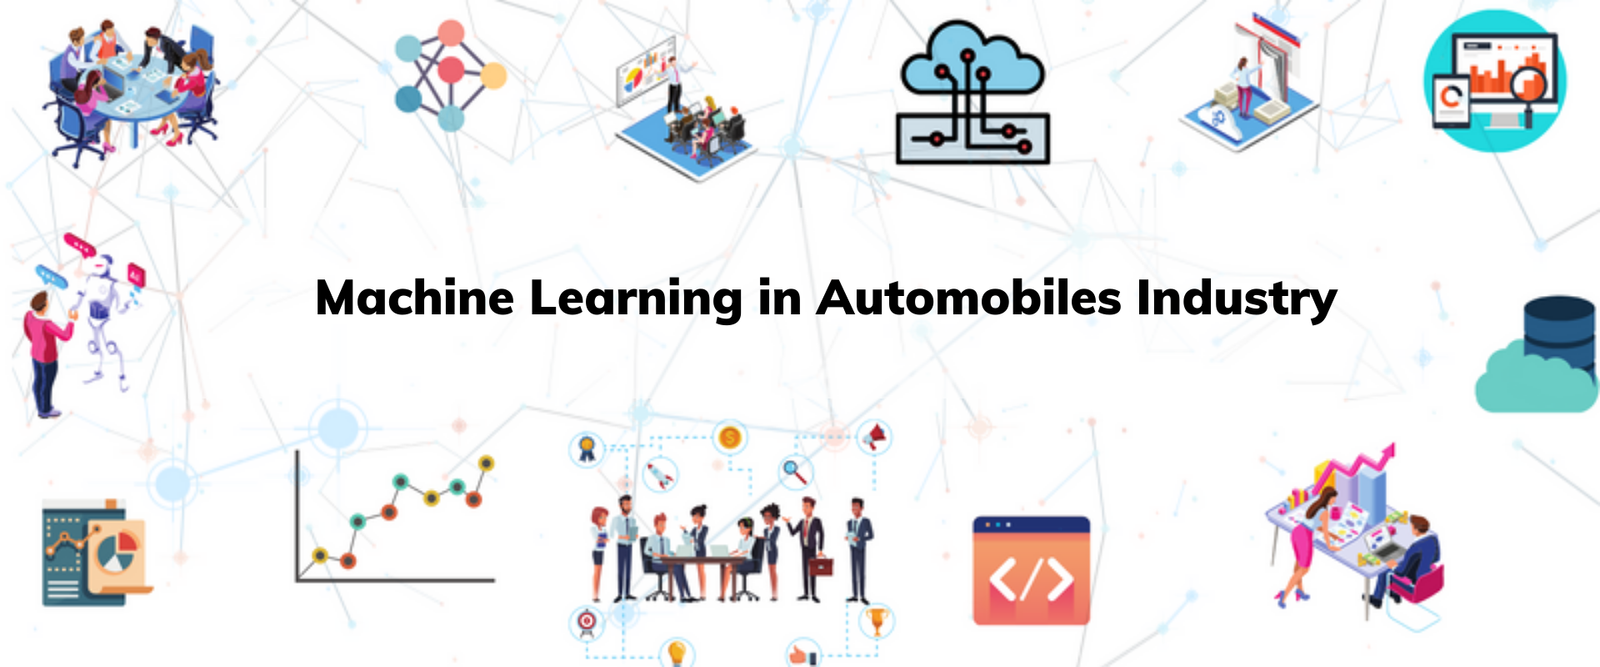 Machine Learning In Automobiles Industry Pianalytix Build RealWorld